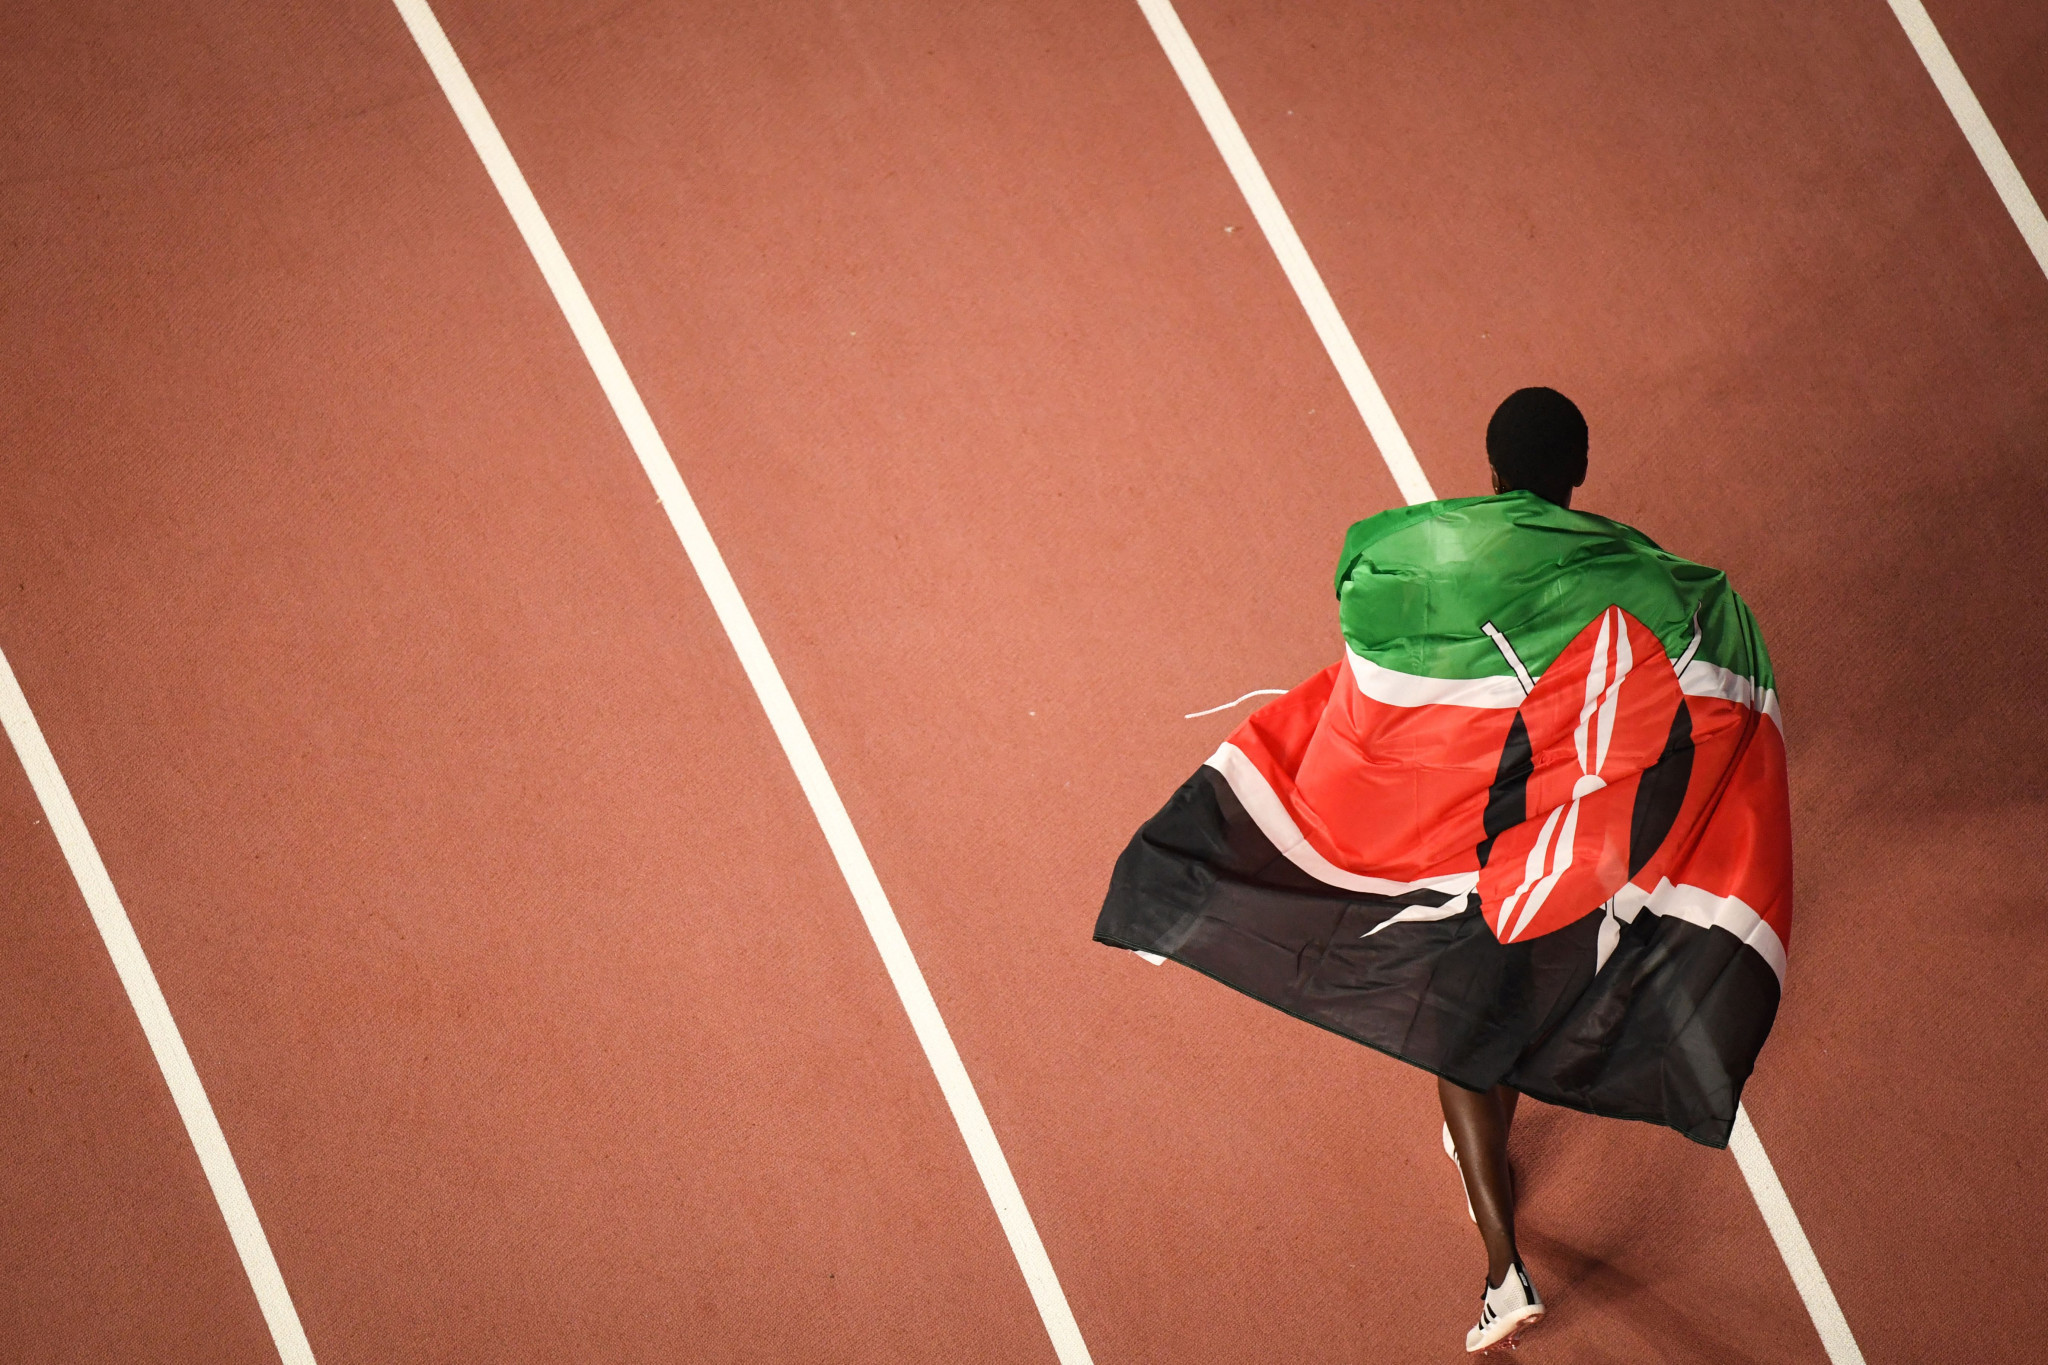 Kenyan Minister calls for support not sanctions as World Athletics Council meets